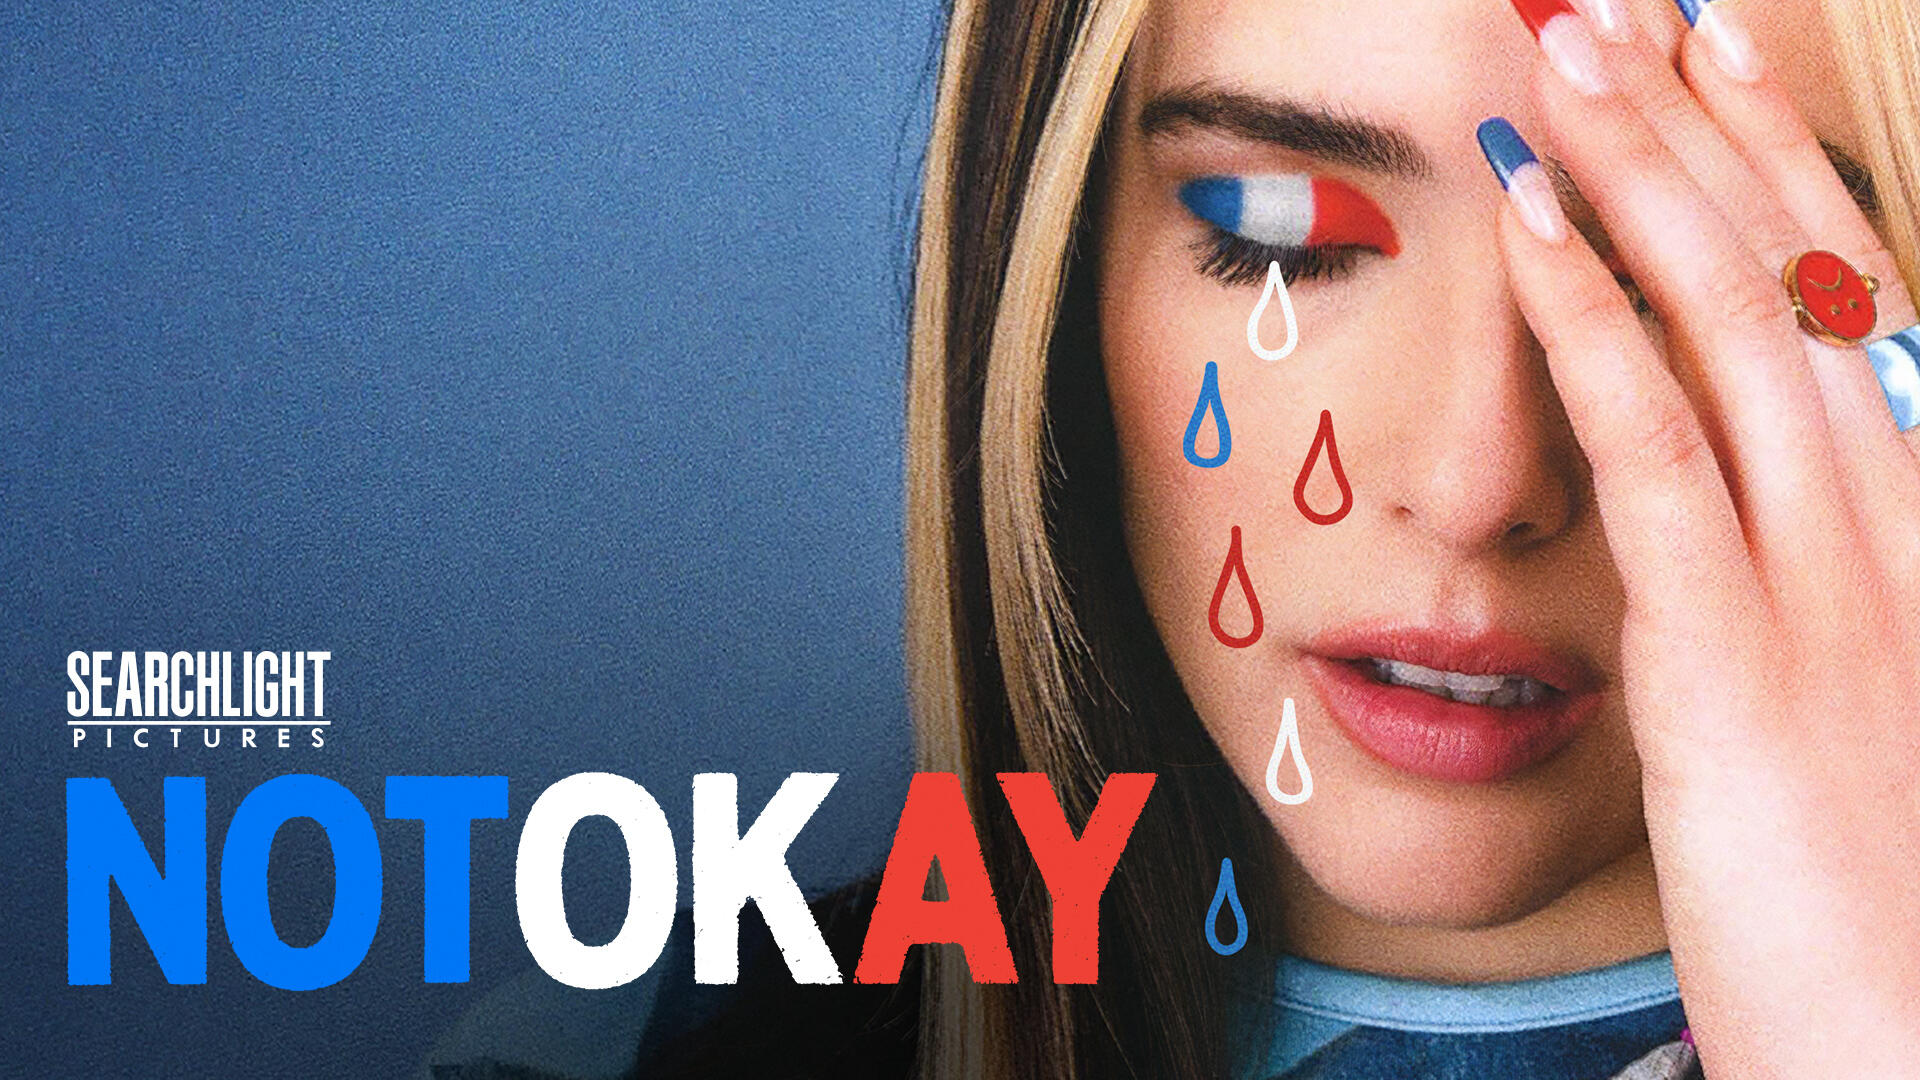 Not Okay -- “Not Okay” follows Danni Sanders (Zoey Deutch), an aimless aspiring writer with no friends, no romantic prospects and — worst of all — no followers, who fakes an Instagram-friendly trip to Paris in the hopes of boosting her social media clout. When a terrifying incident strikes the City of Lights, Danni unwittingly falls into a lie bigger than she ever imagined. She "returns" a hero, even striking up an unlikely friendship with Rowan (Mia Isaac), a school-shooting survivor dedicated to societal change, and scooping up the man of her dreams, Colin (Dylan O'Brien). As an influencer and advocate, Danni finally has the life and audience she always wanted. But it’s only a matter of time before the facade cracks, and she learns the hard way that the Internet loves a takedown. Danni (Zoey Deutch), shown. (Courtesy of Searchlight Pictures)